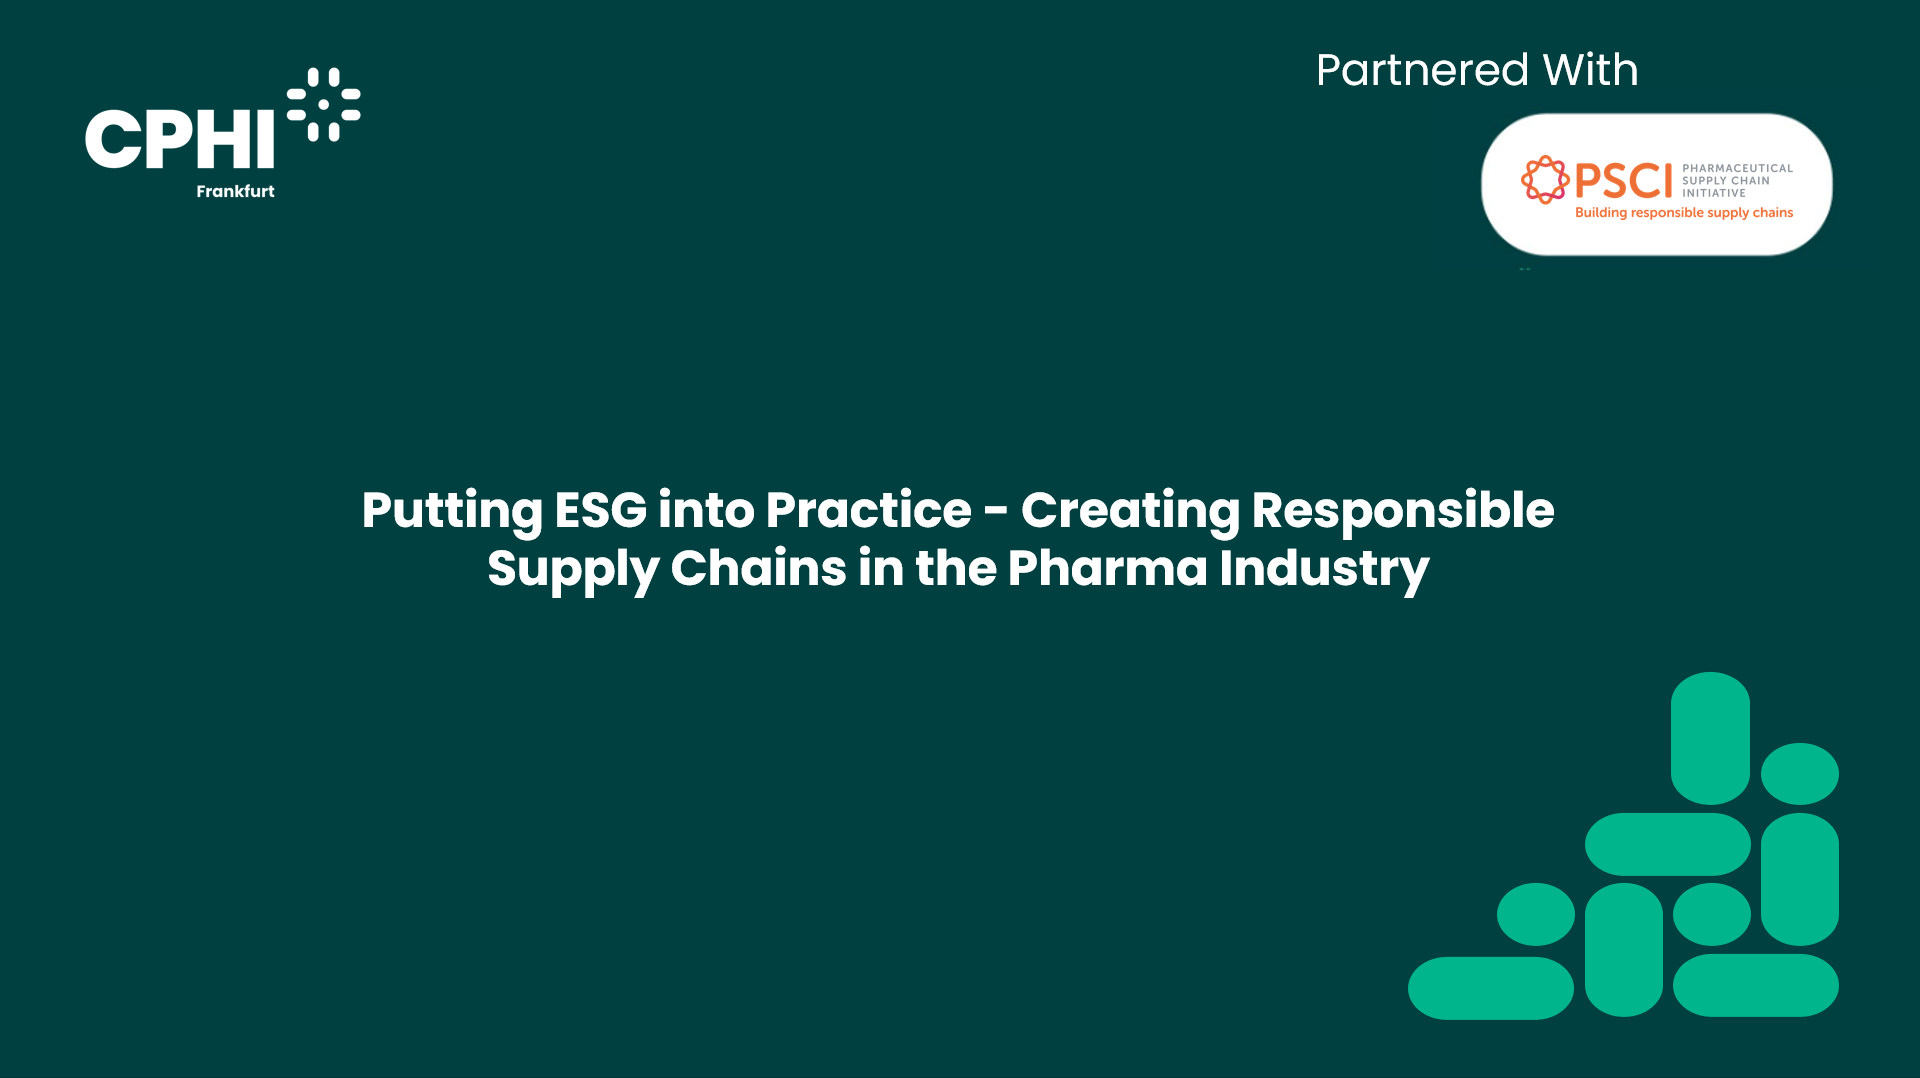 Putting ESG into Practice - Creating Responsible Supply Chains in the Pharma Industry